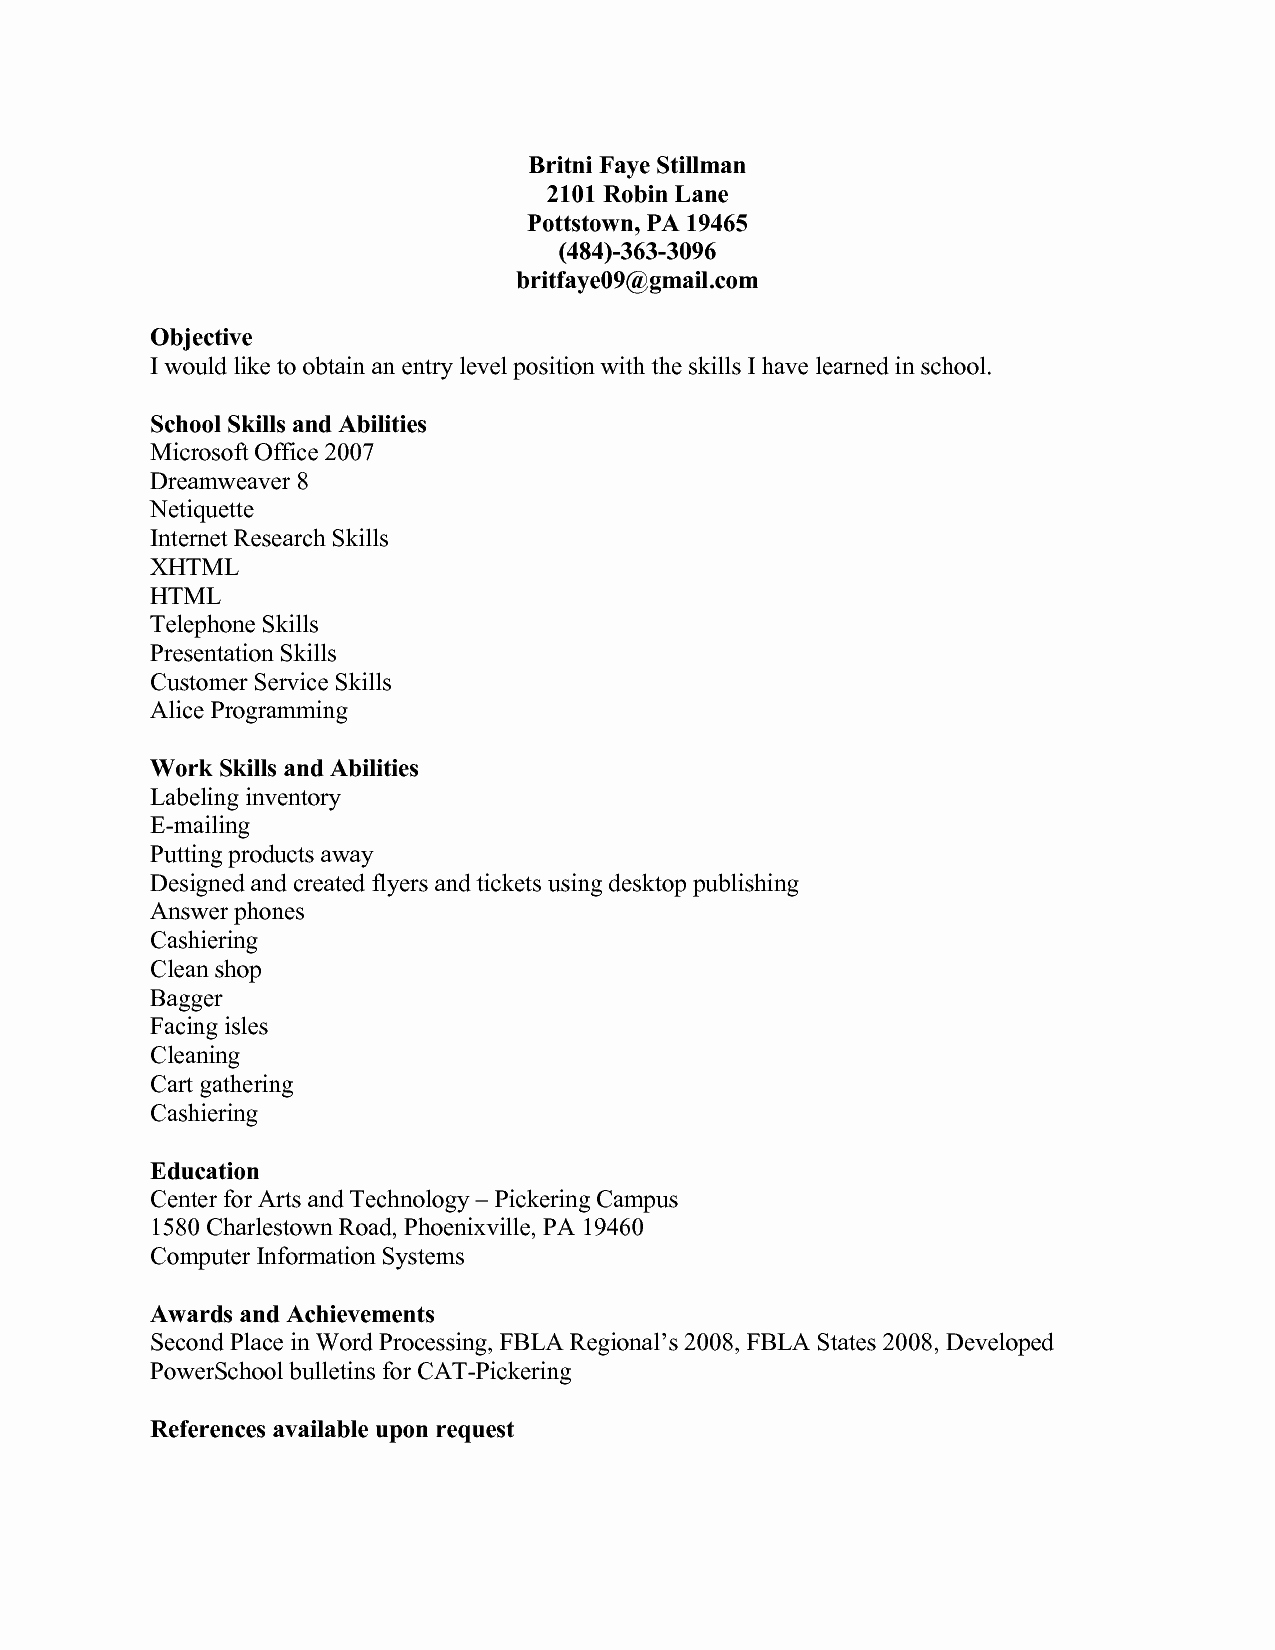 Housekeeping Skills Resume Basic Template for Cleaning Job